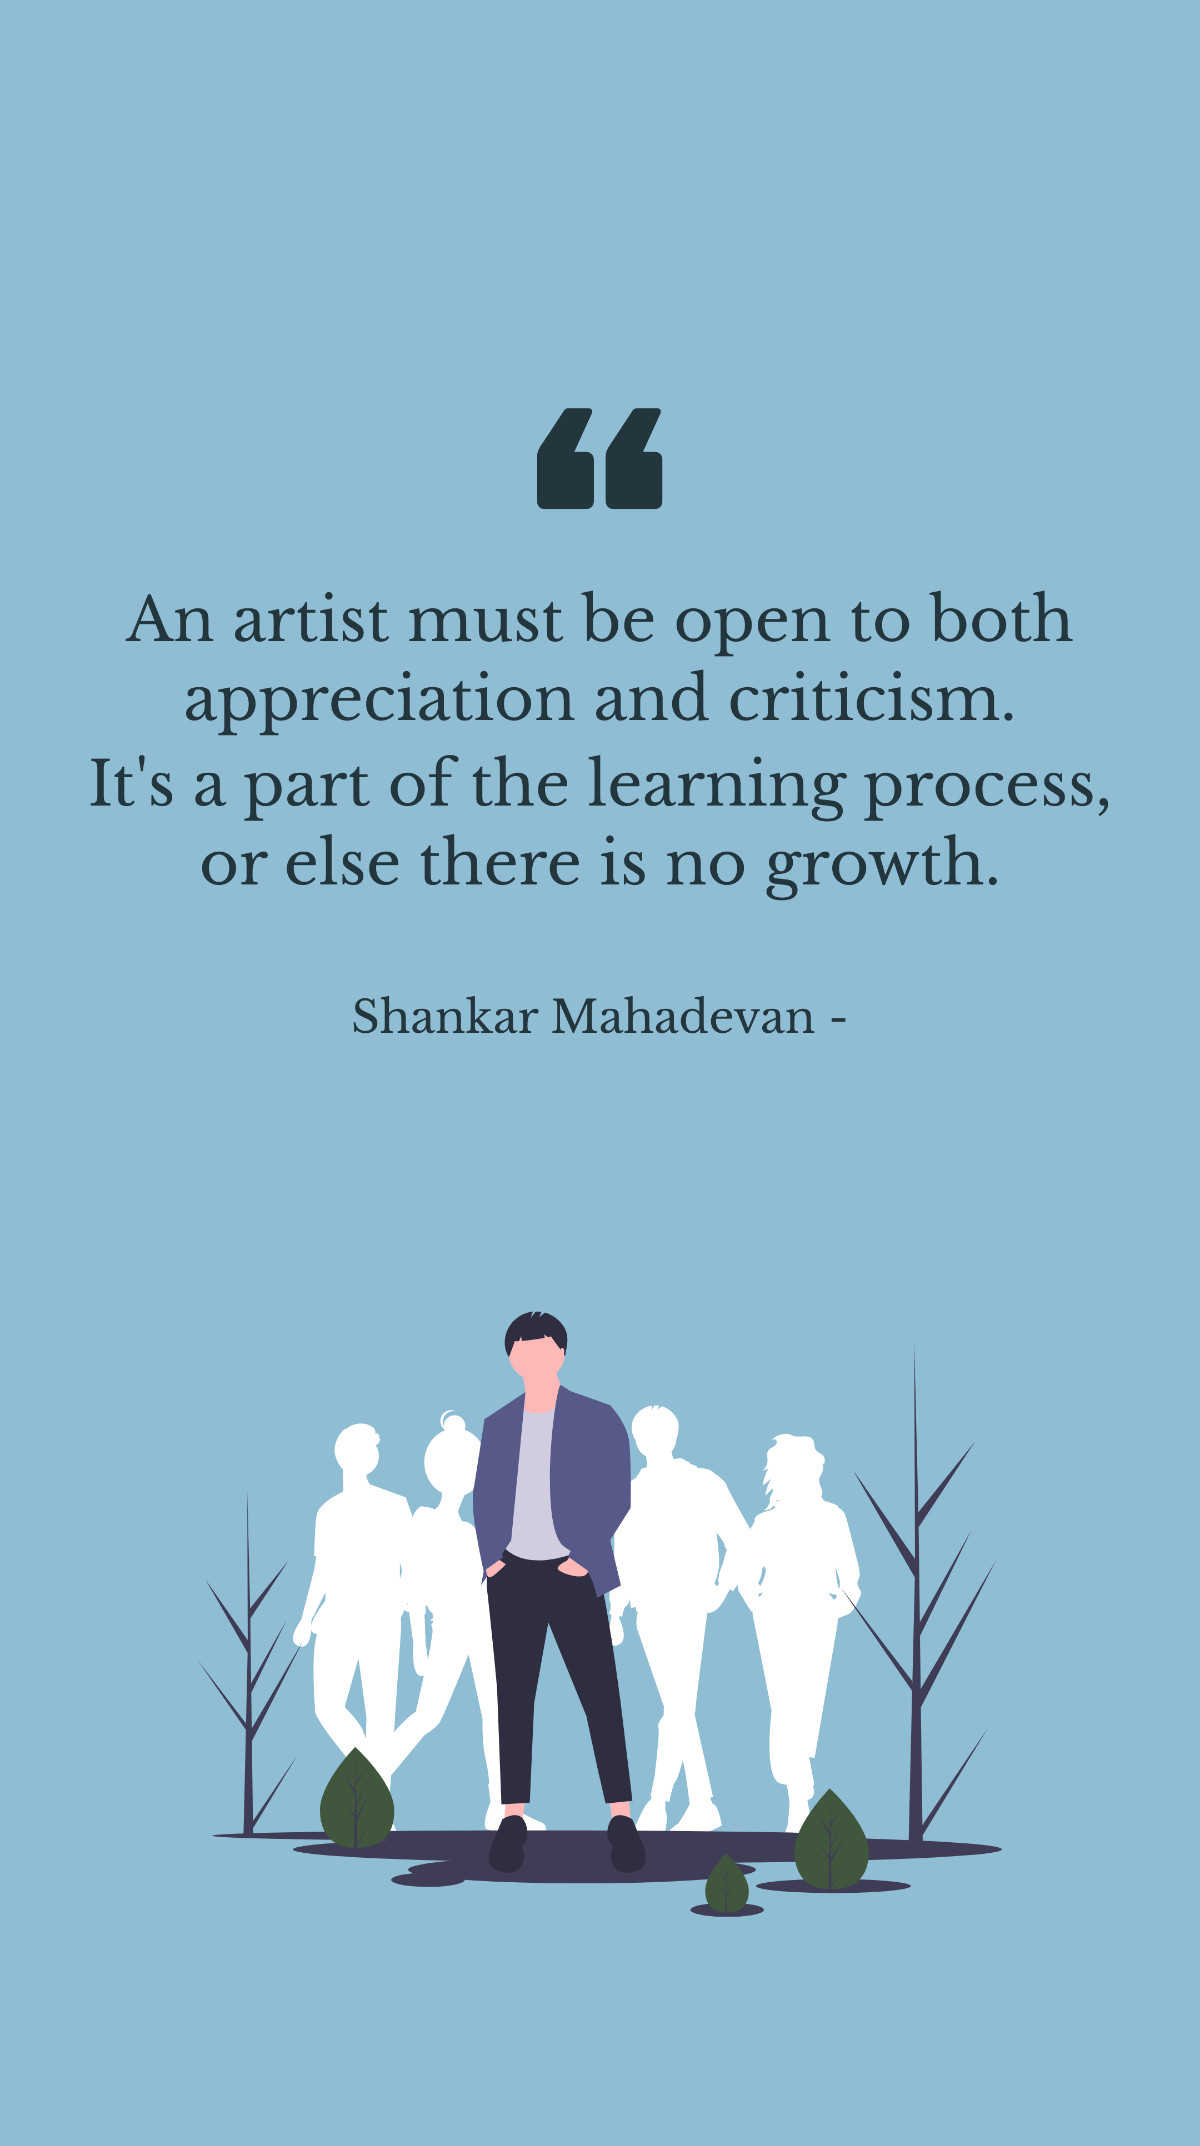 Free Shankar Mahadevan - An artist must be open to both appreciation and criticism. It's a part of the learning process, or else there is no growth. Template